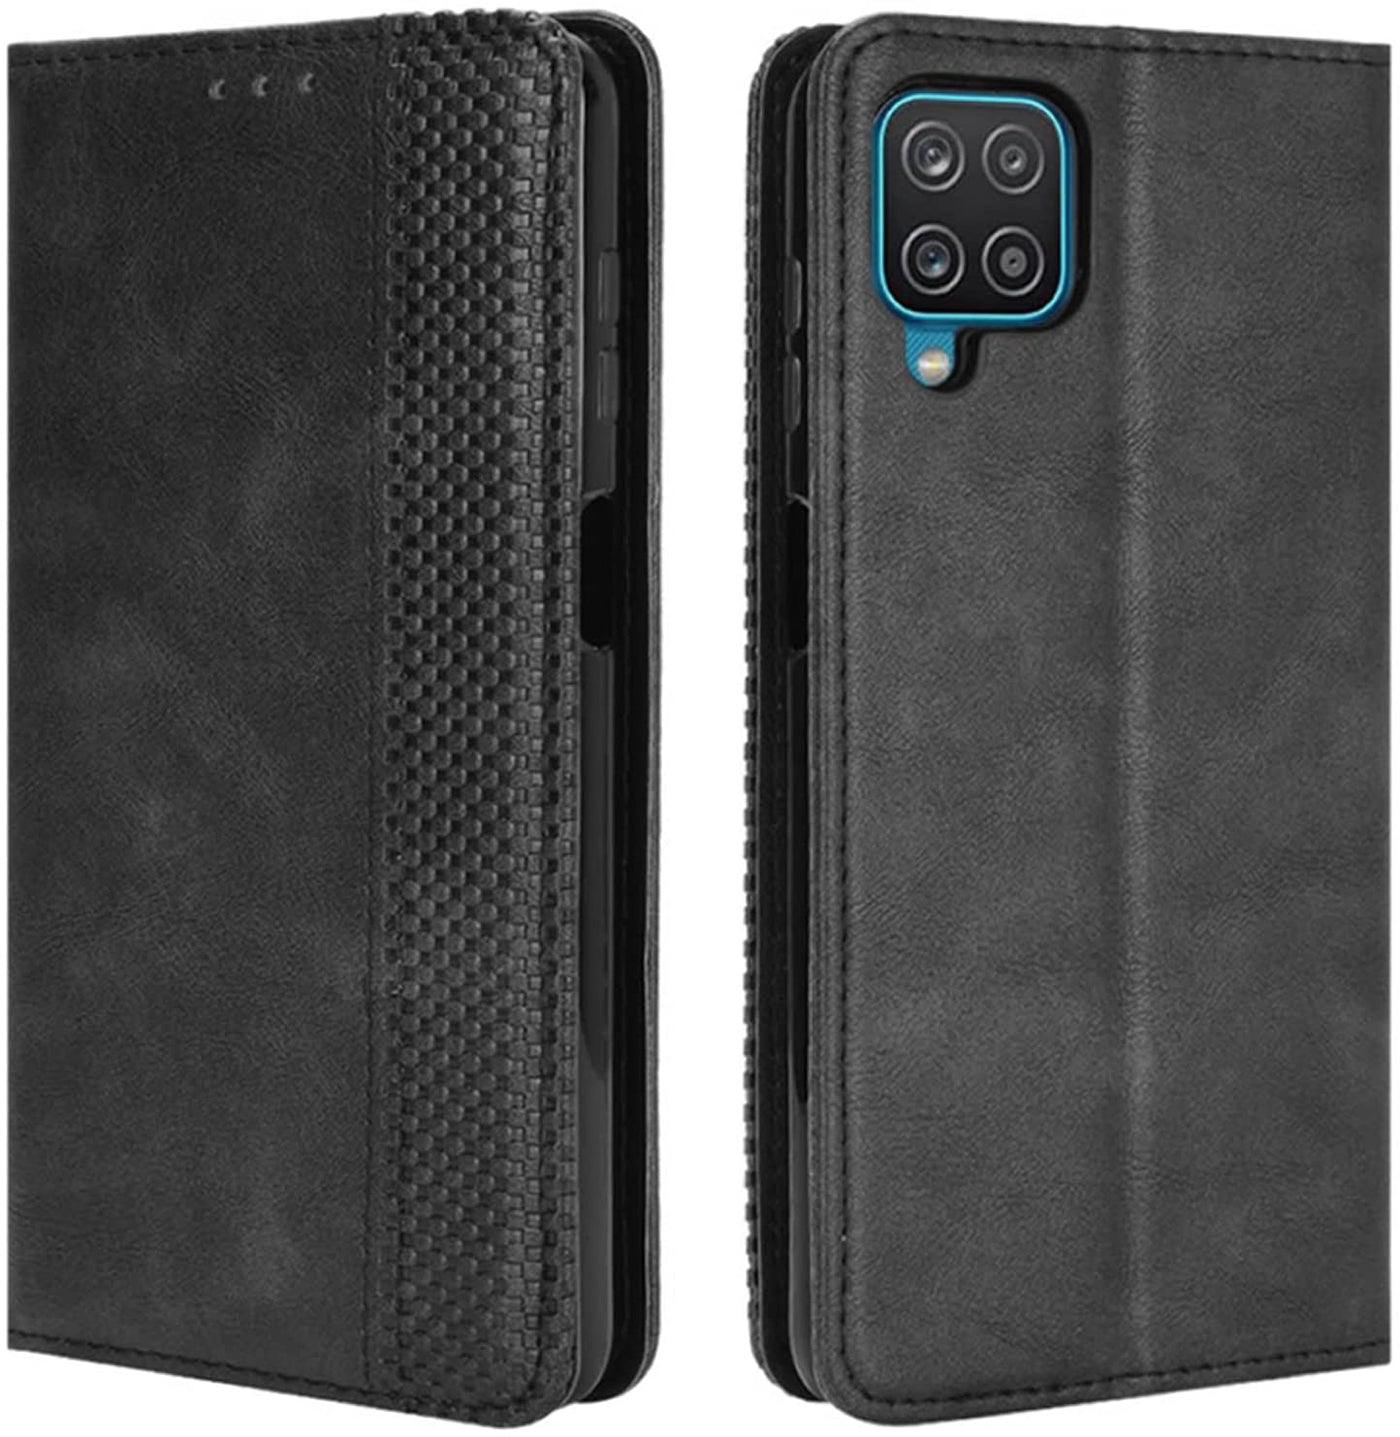 Samsung Galaxy M32 black color leather wallet flip cover case By excelsior